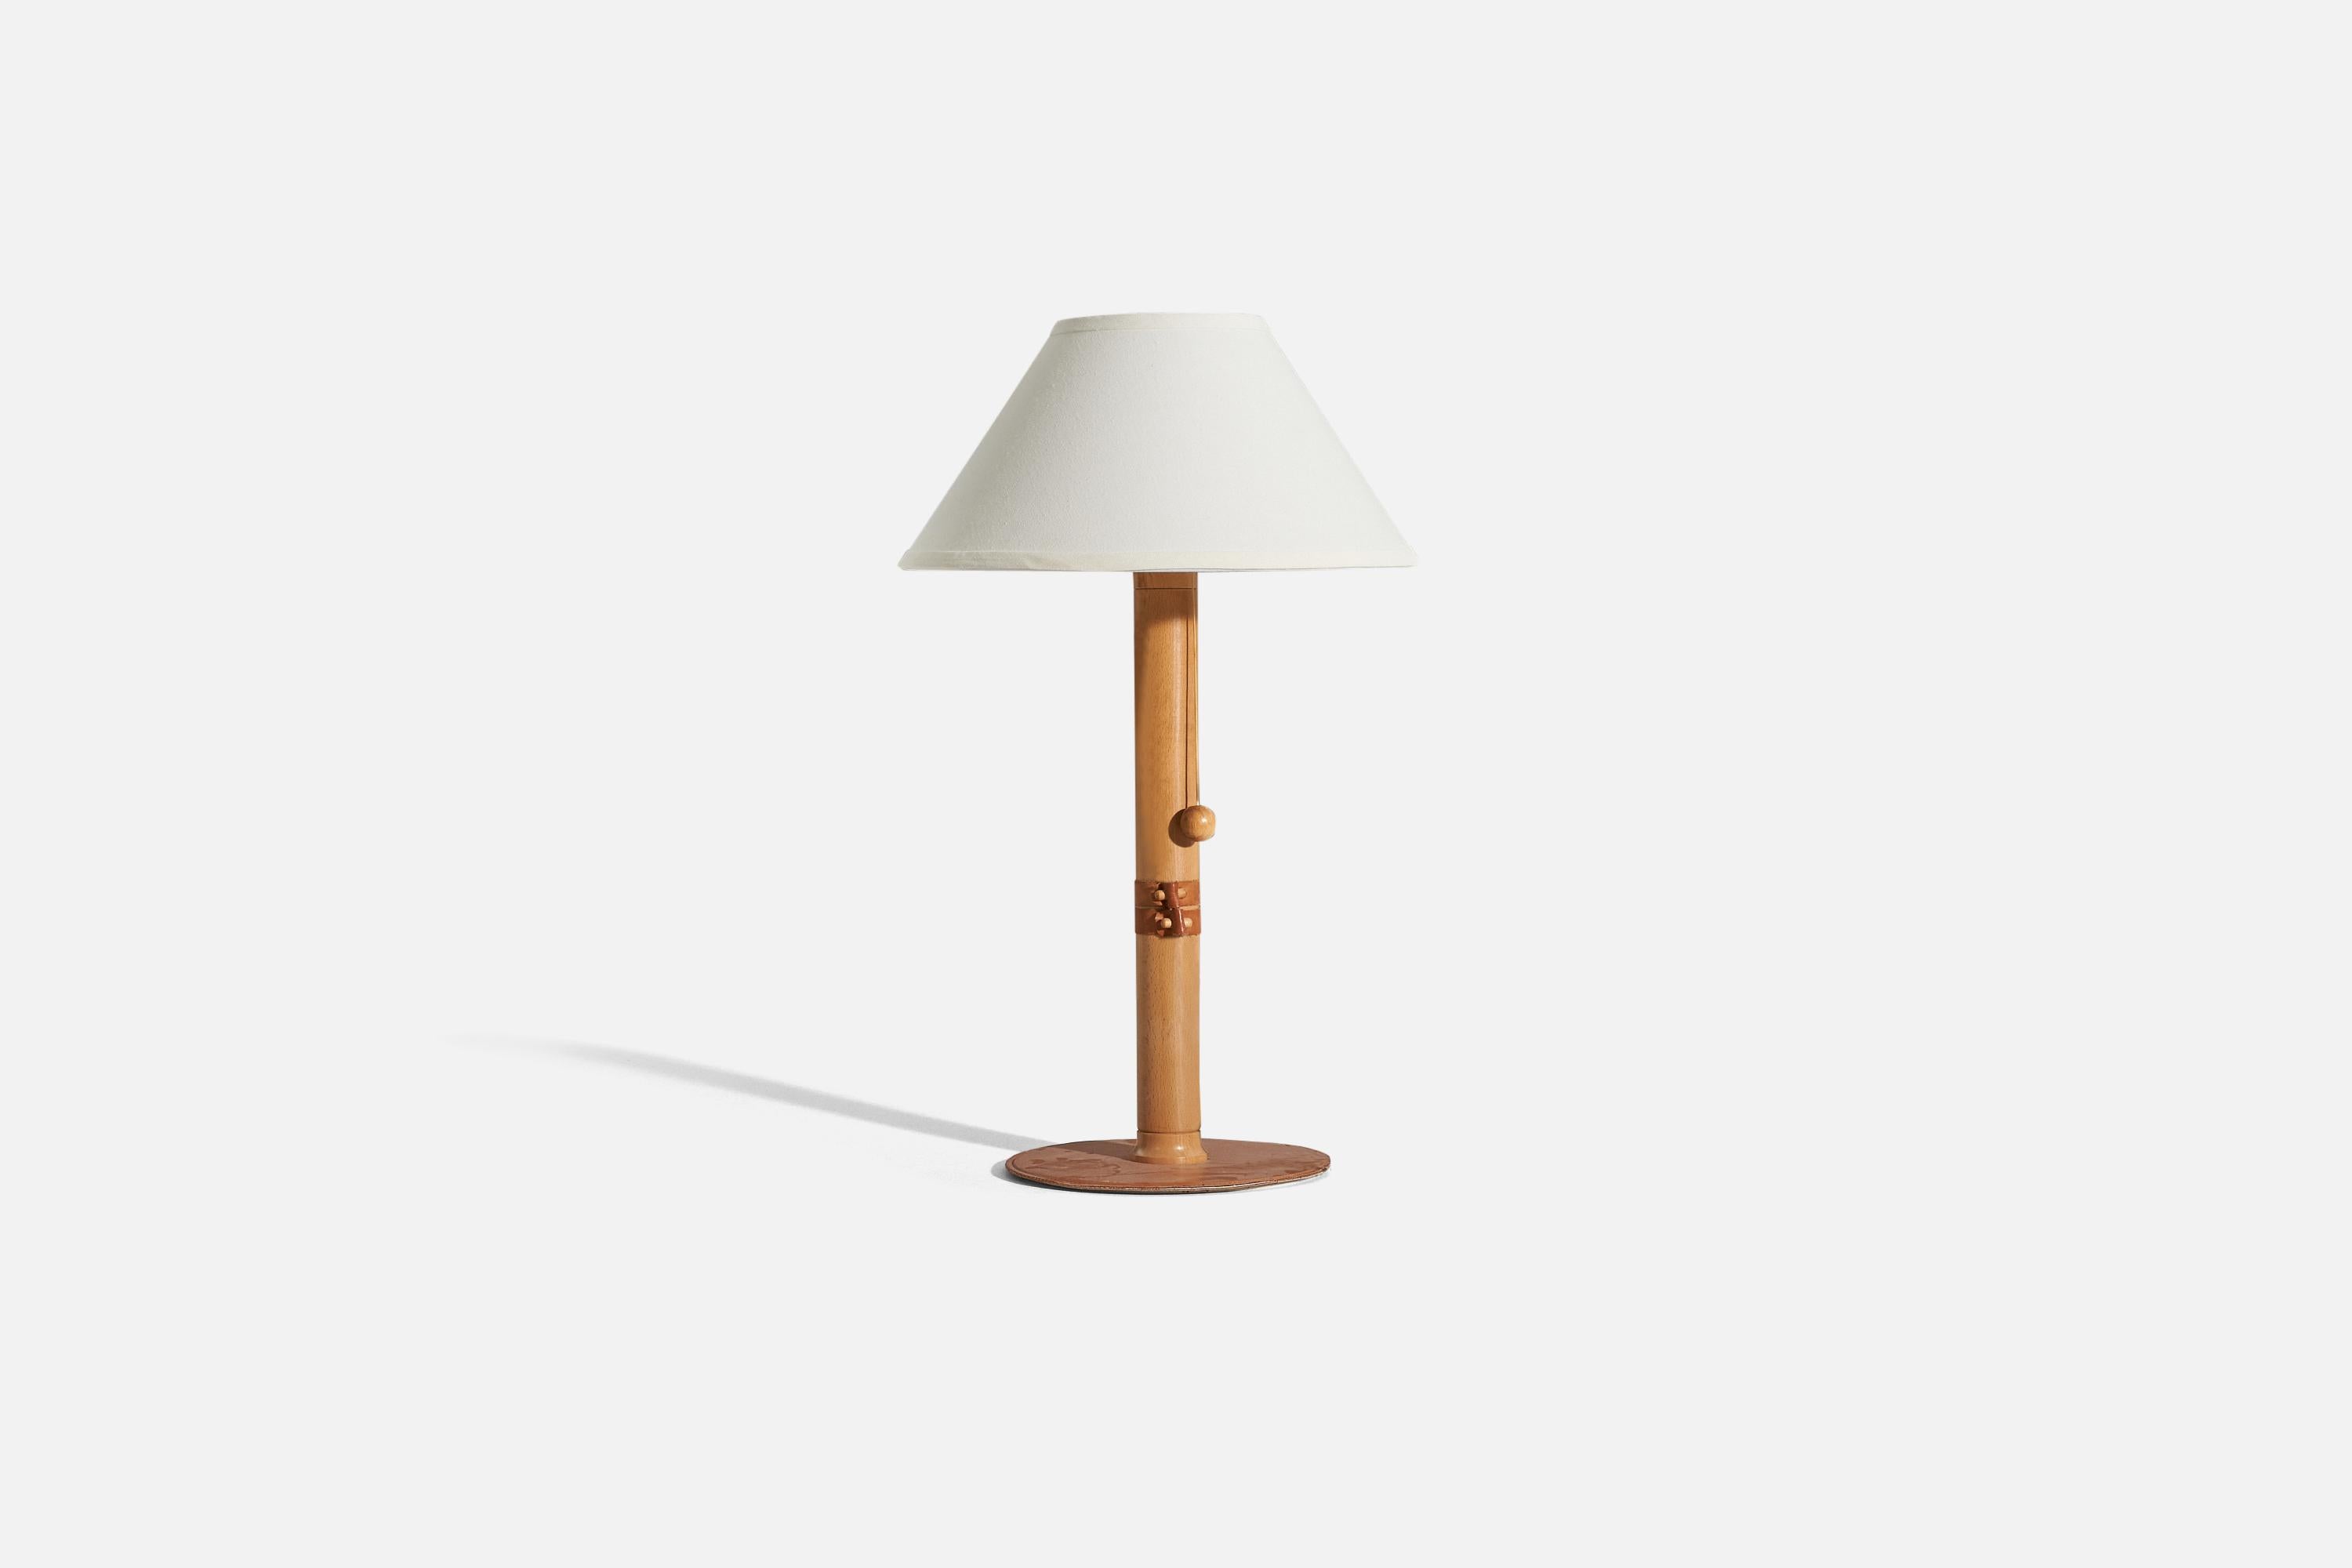 A wood and leather table lamp designed and produced by a Swedish designer, Sweden, 1970s.

Sold without lampshade. 
Dimensions of lamp (inches) : 19.5625 x 9.125 x 9.125 (H x W x D)
Dimensions of shade (inches) : 5.75 x 14 x 8 (T x B x